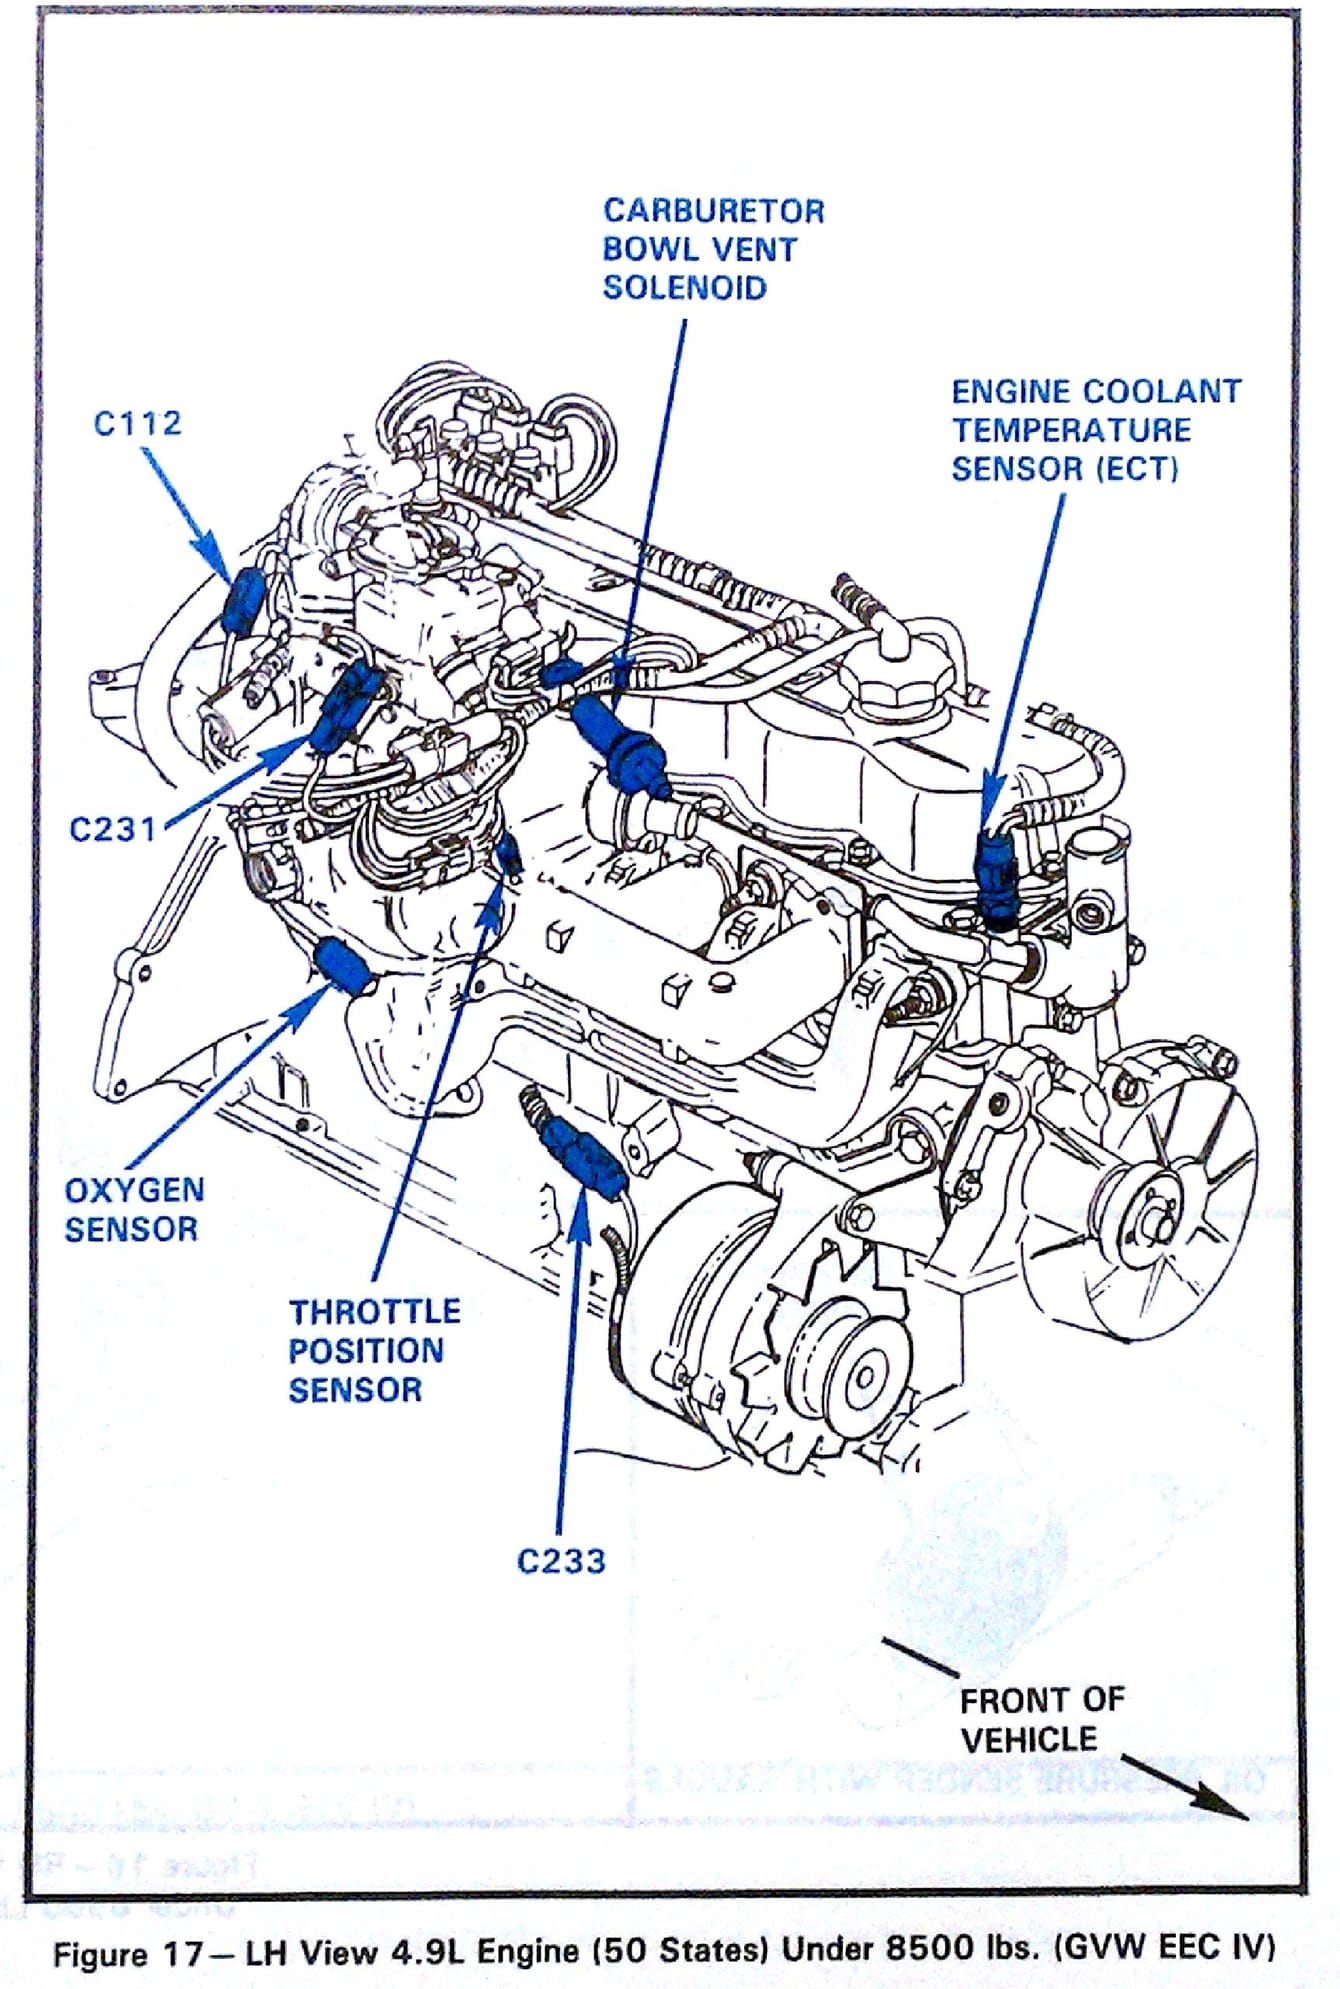 1985 ford f150 300 inline 6 smog help - Ford Truck ... 1991 jeep grand cherokee wiring schematic 